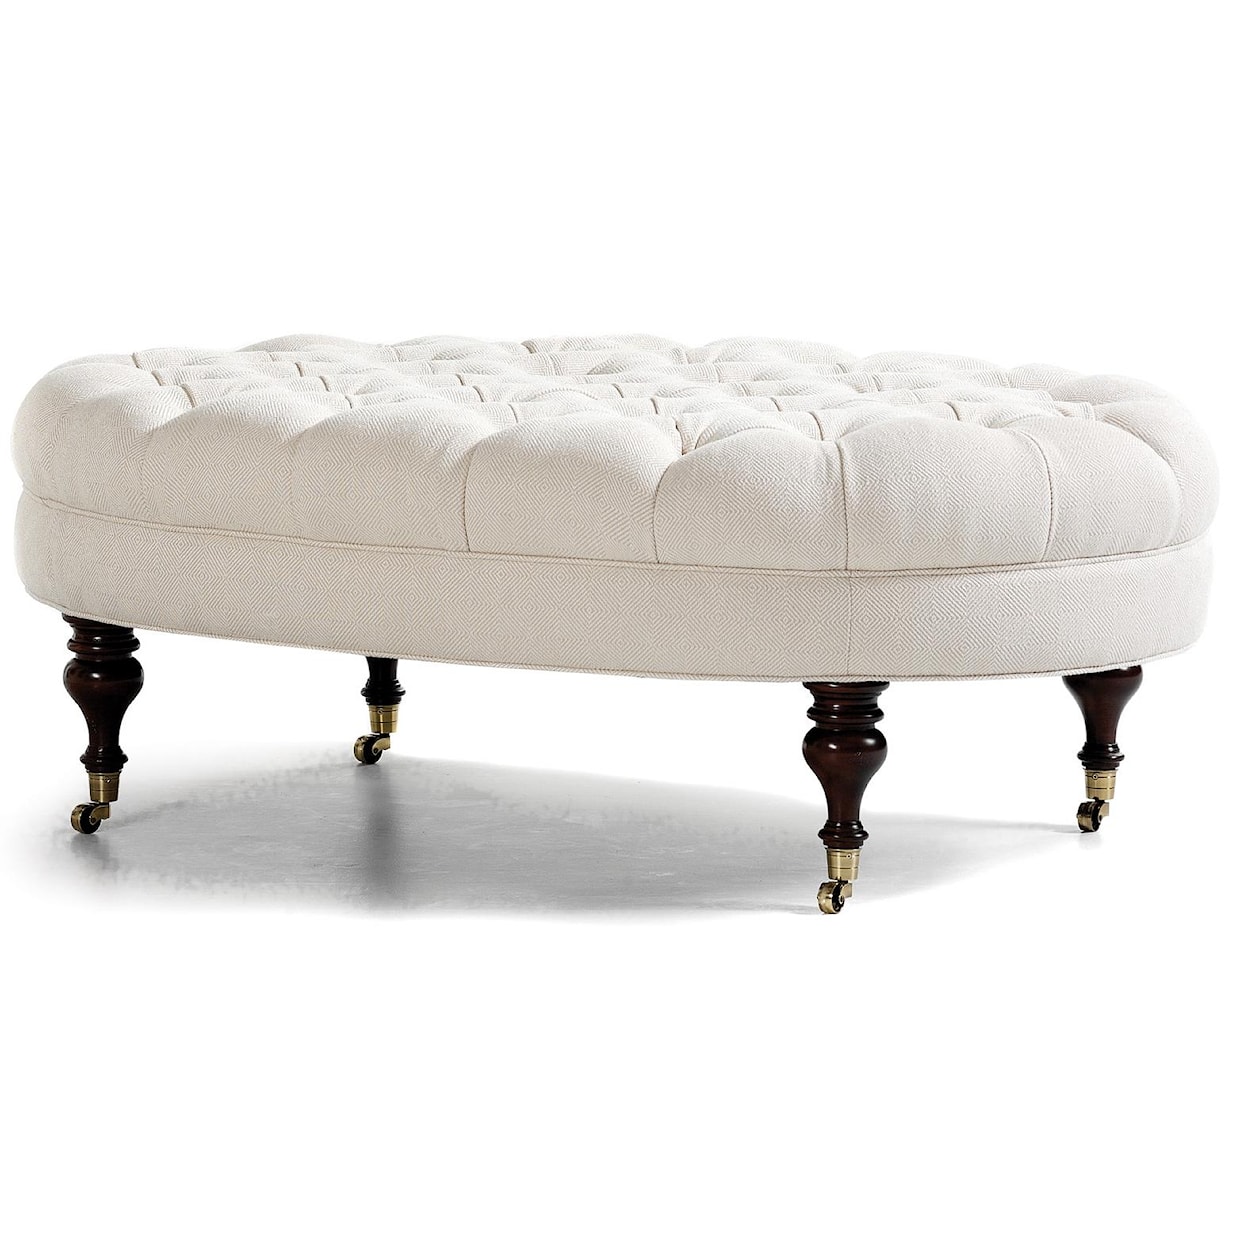 Jessica Charles Fine Upholstered Accents Marilyn Ottoman   